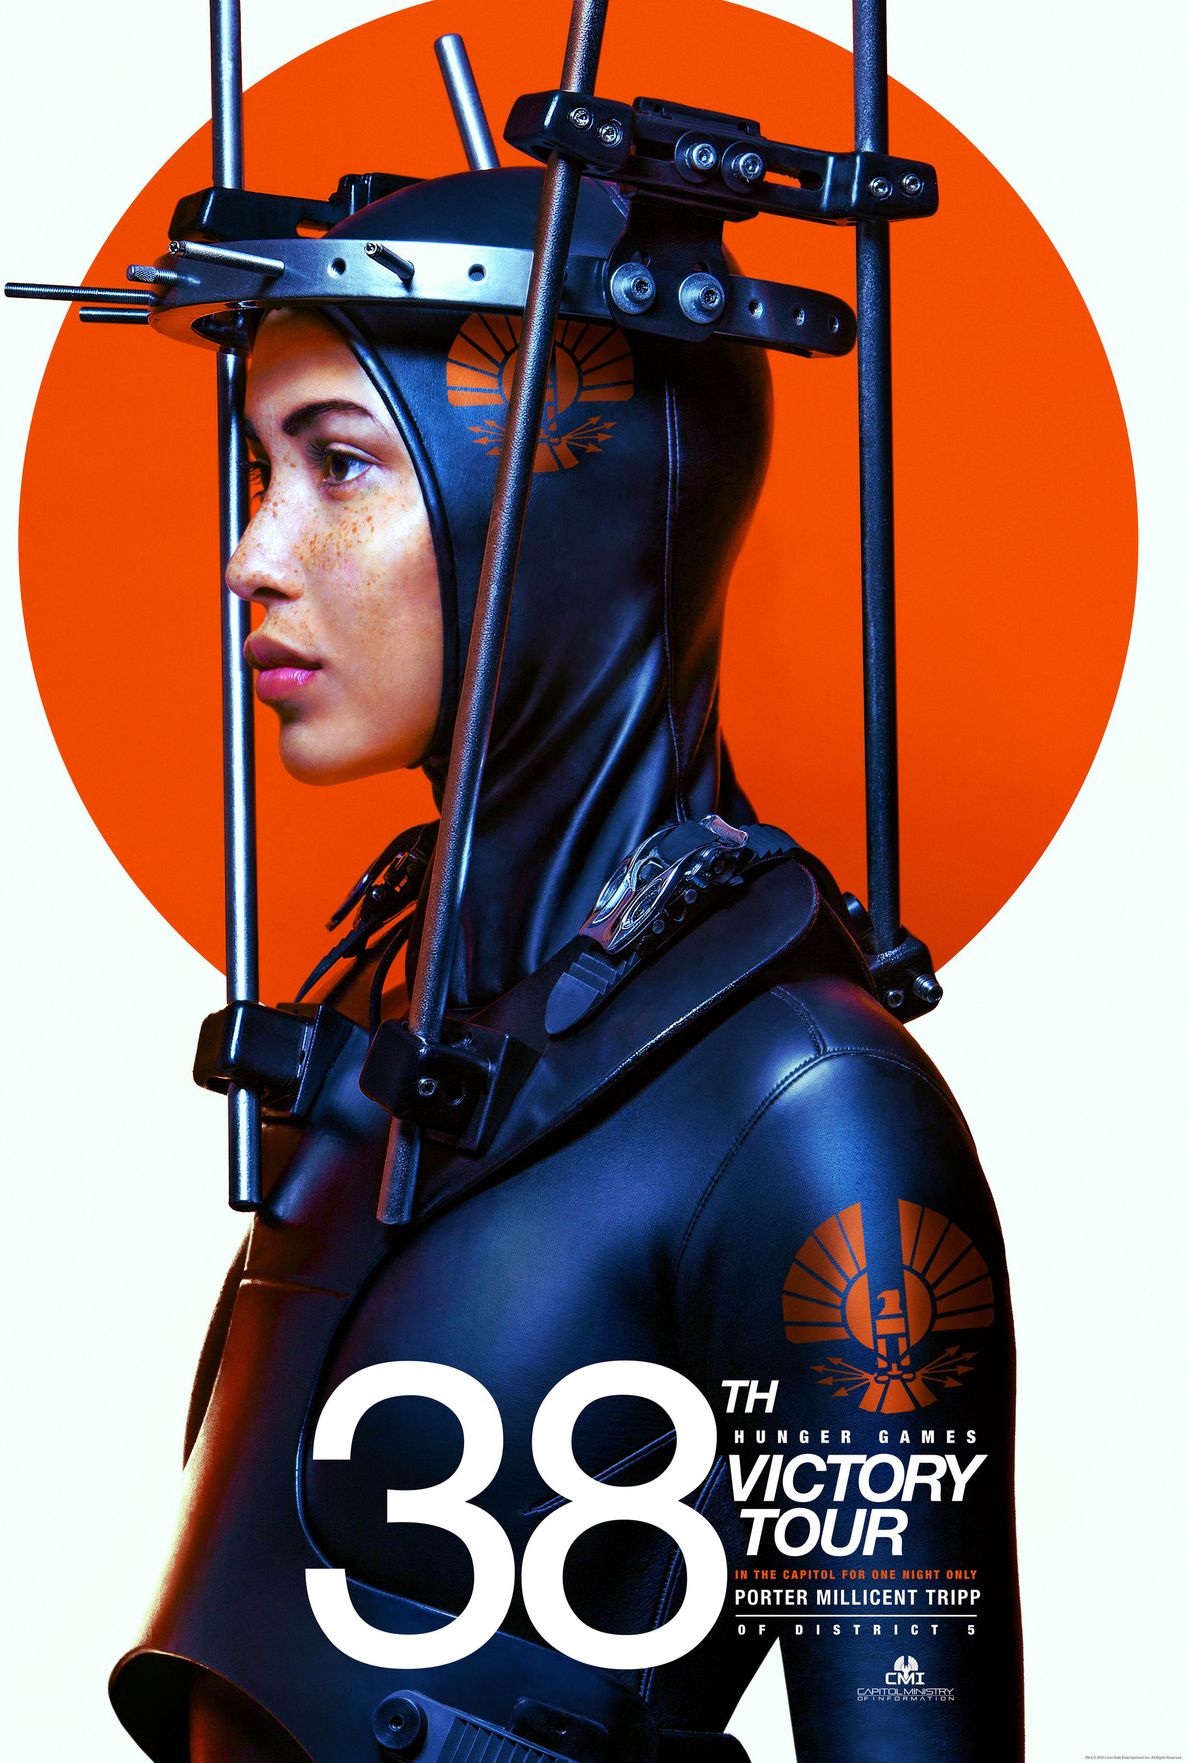 Victory Poster for the 38th Hunger Games